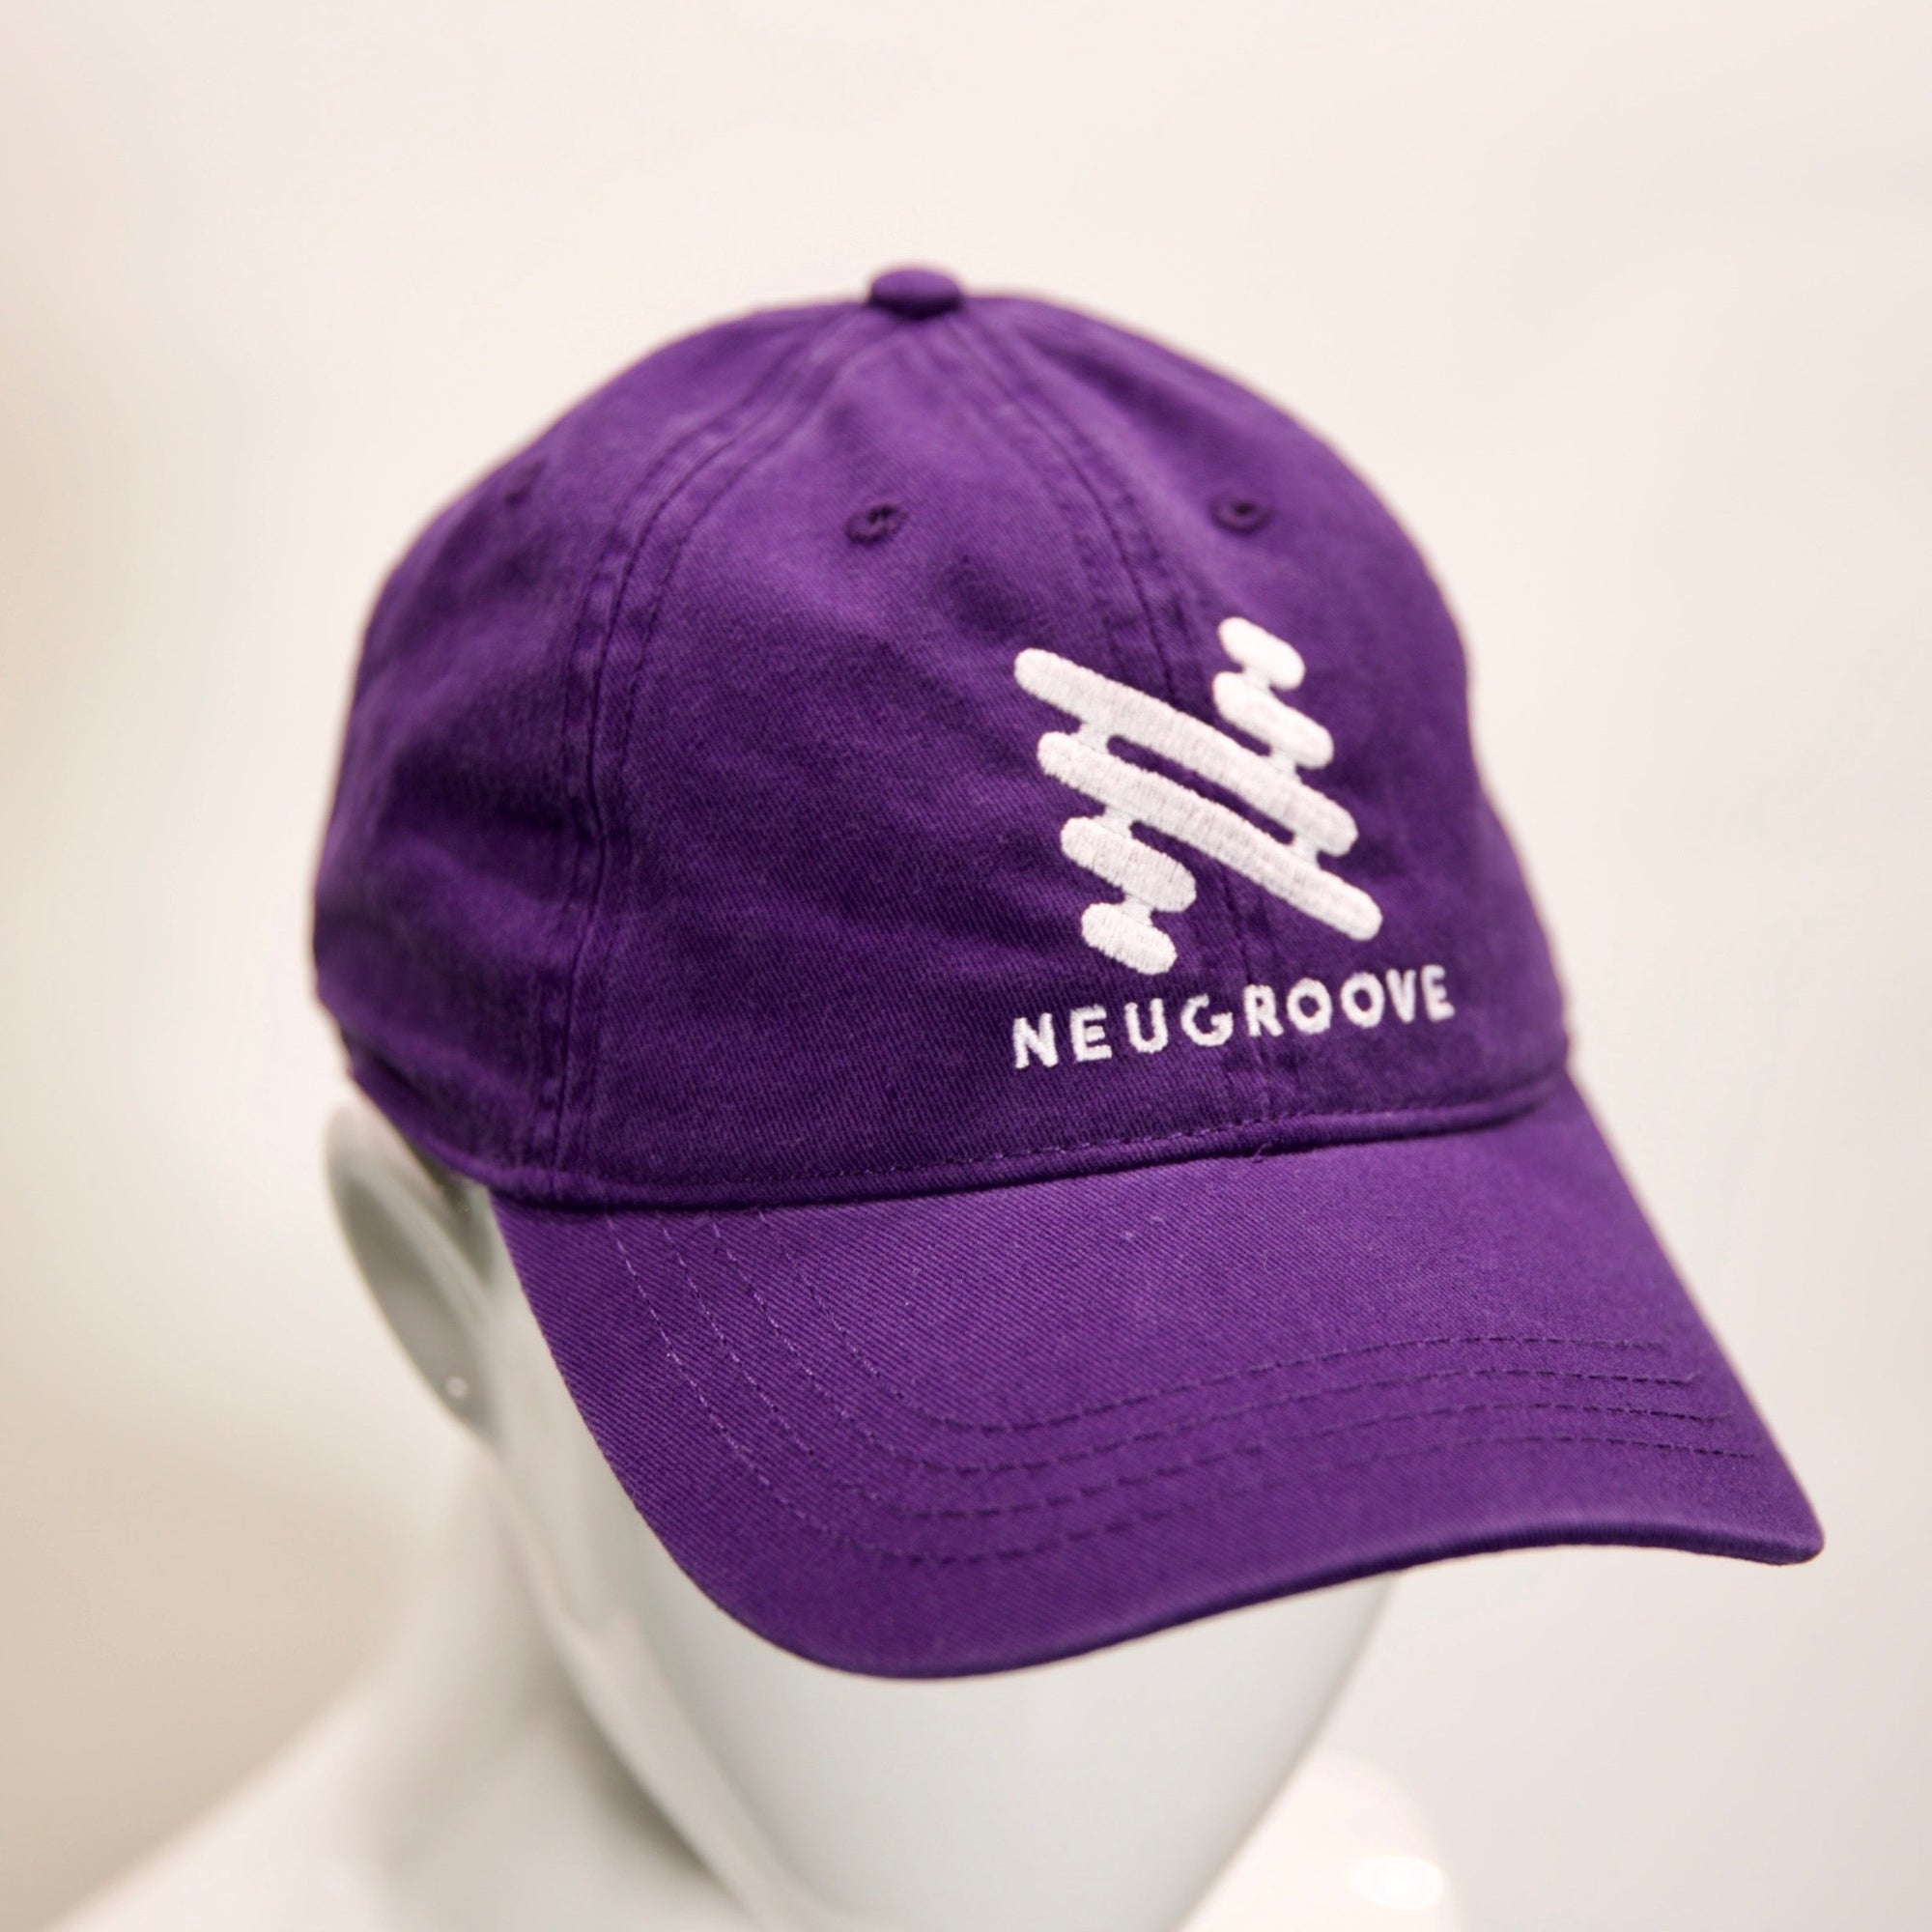 Neugroove, an worldwide movement to hurt less and love more. Protect yourself against the elements and enjoy a smile while gently reminding yourself that what's inside matters the most! 